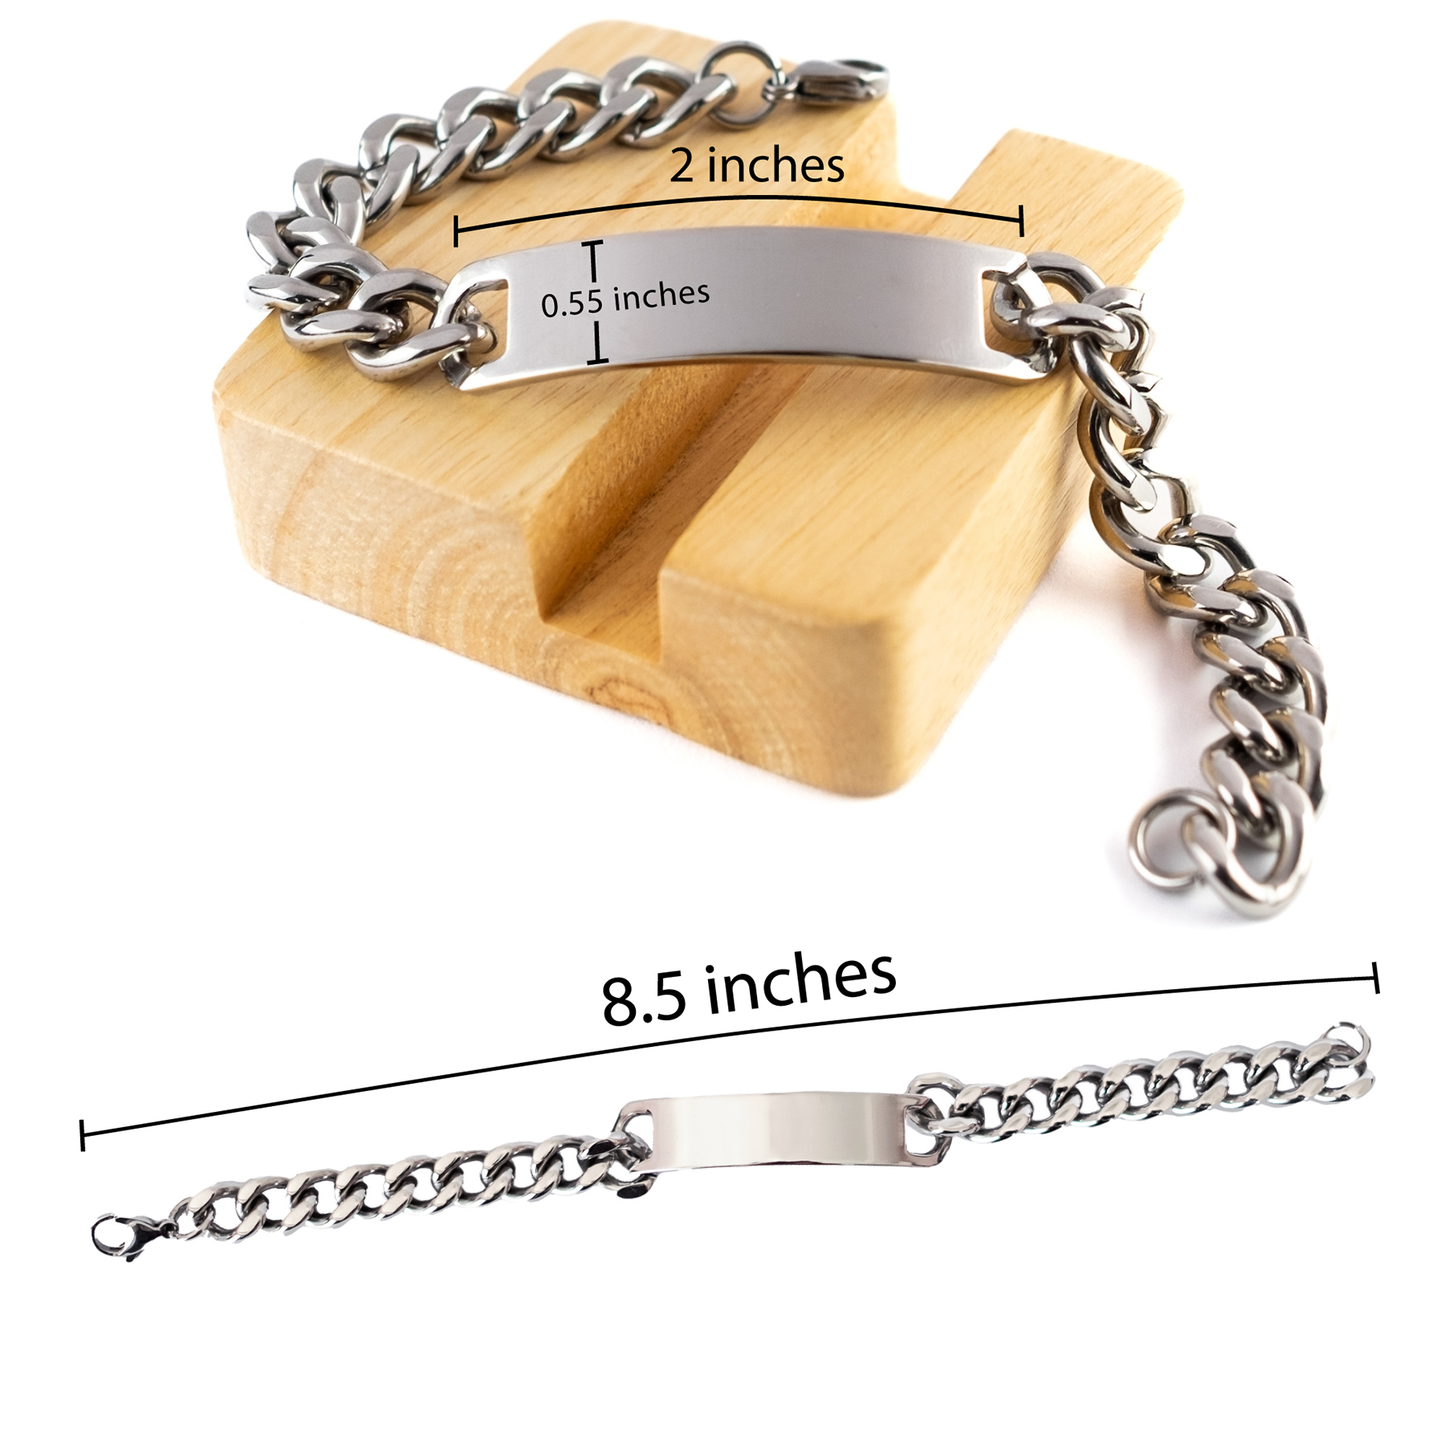 To My Grandad Thank You Gifts, You are appreciated more than you know, Appreciation Cuban Chain Stainless Steel Bracelet for Grandad, Birthday Unique Gifts for Grandad